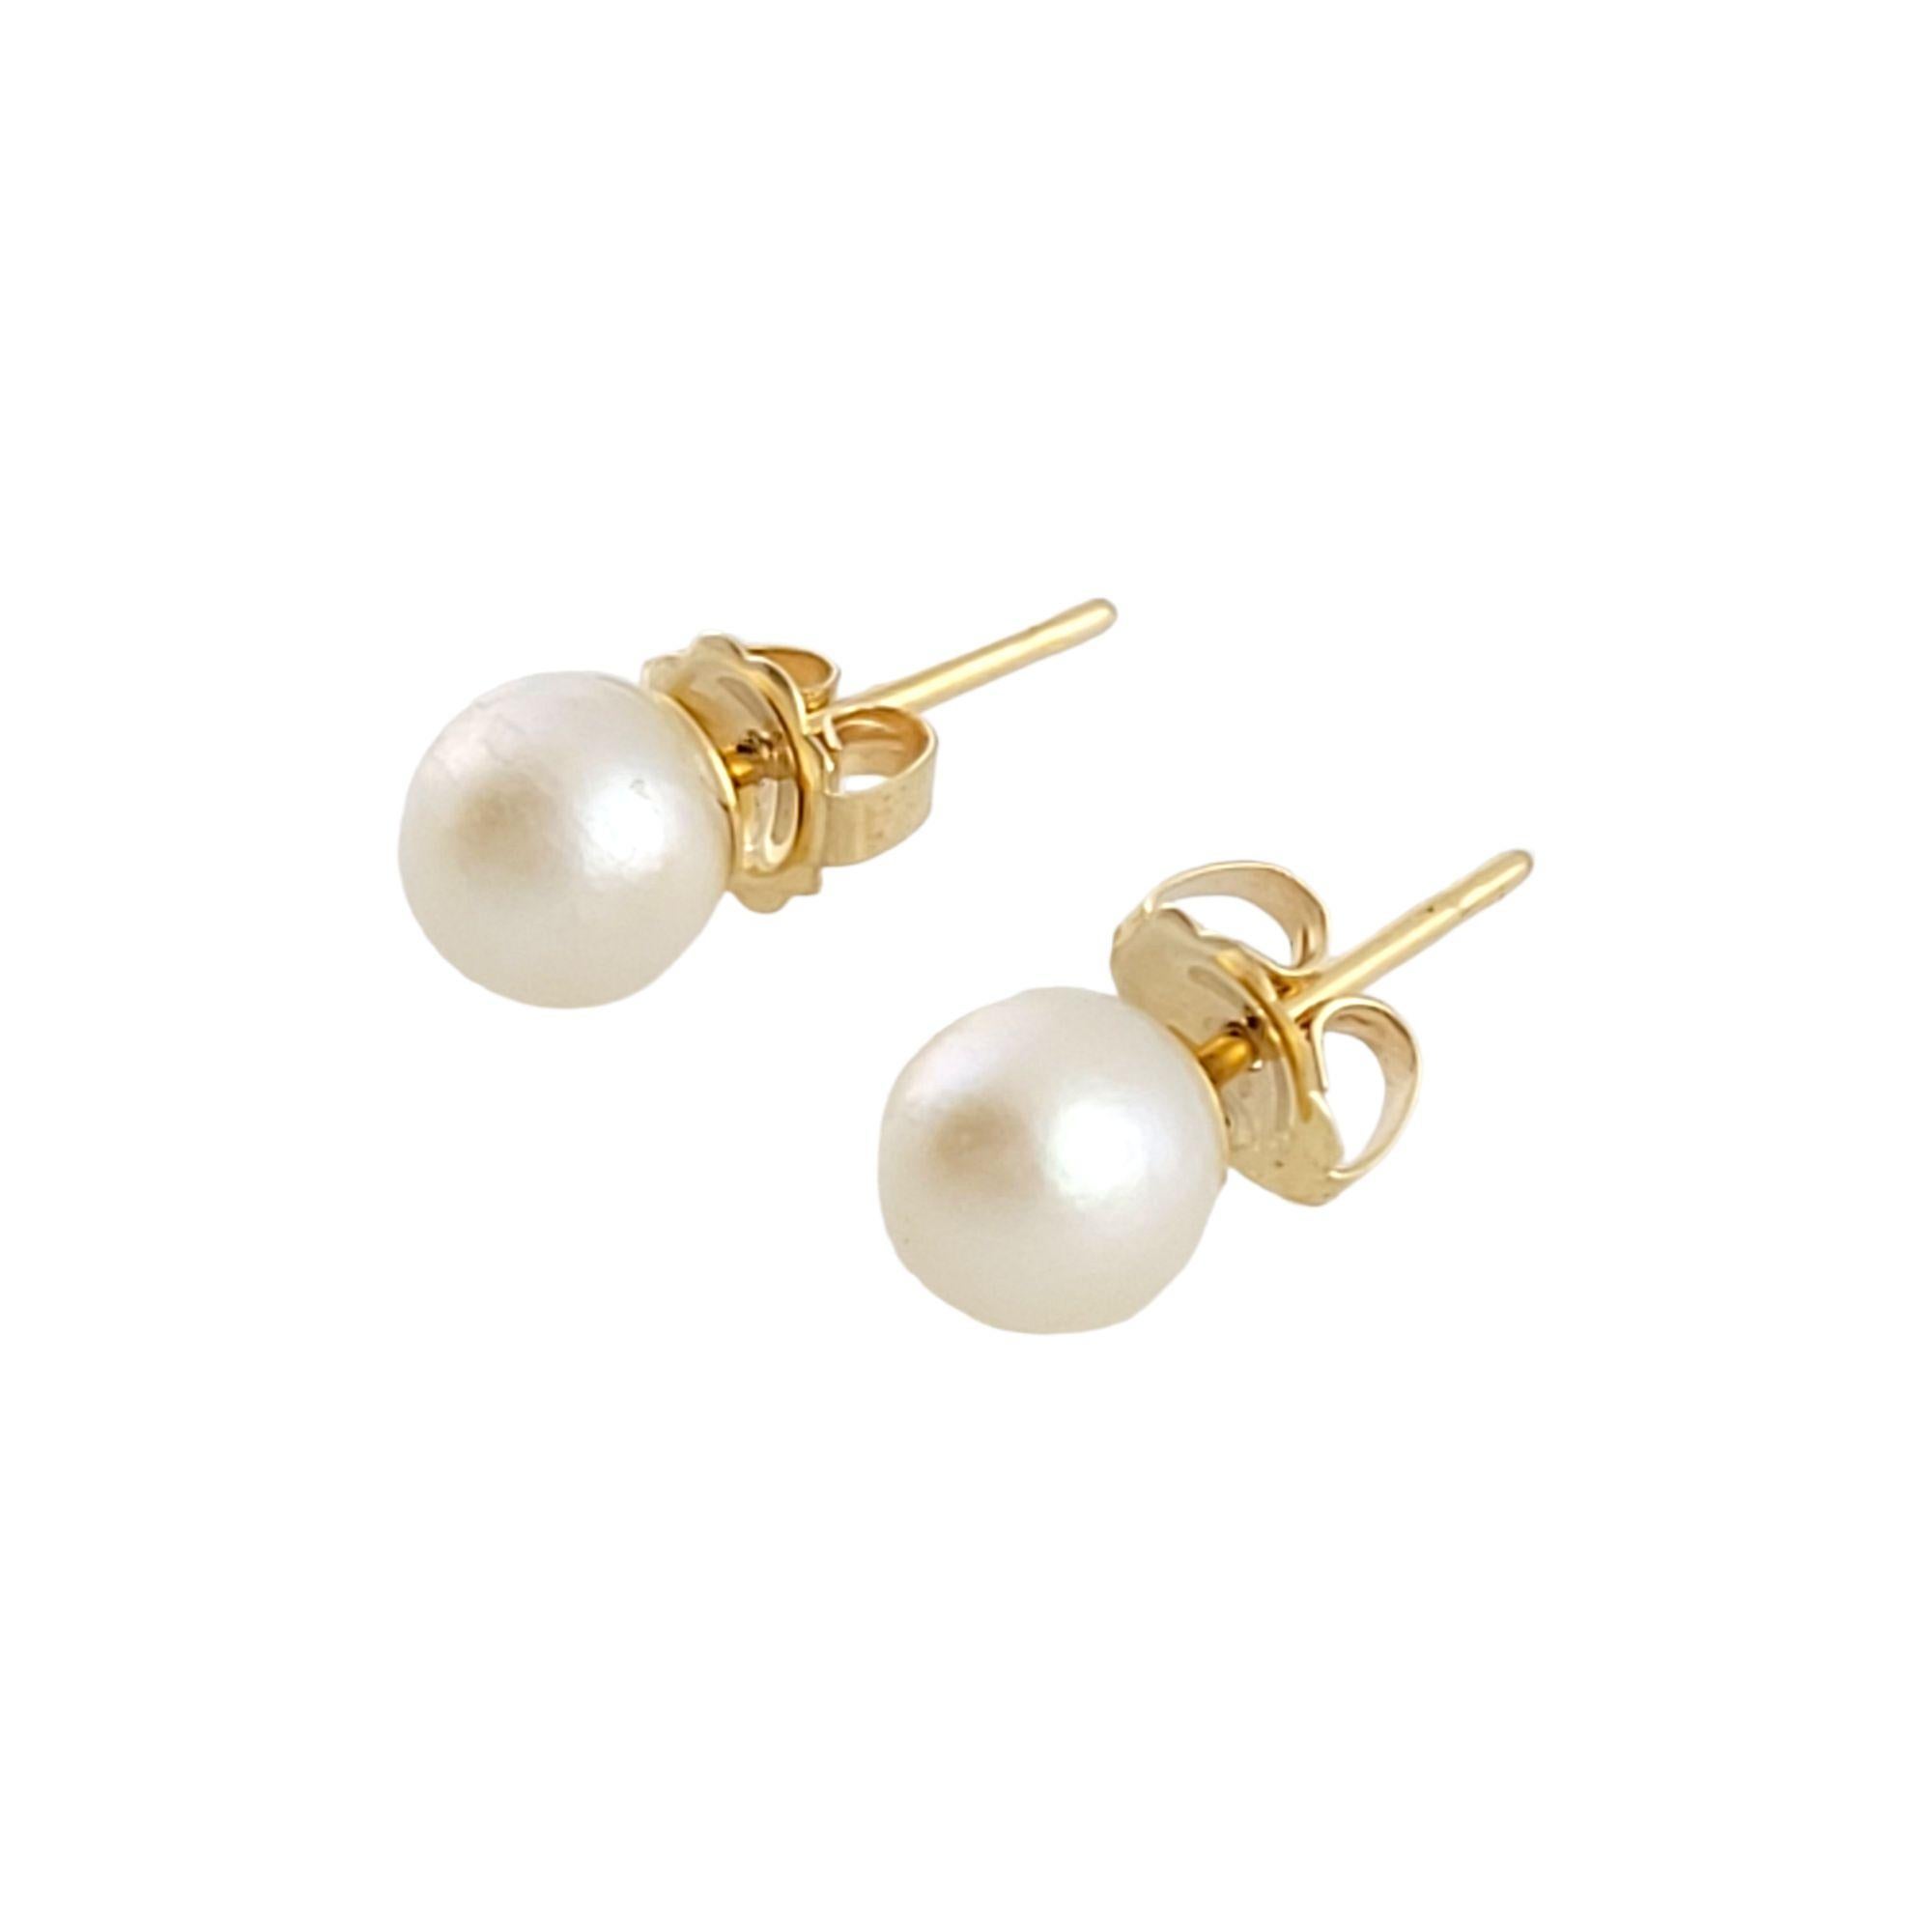 Vintage 14K Yellow Gold Pearl Studs

Gorgeous pearl studs on 14K yellow gold posts and backings!

Pearls: 6mm

Weight: 0.9 g/ 0.5 dwt

Tested 14K

Very good condition, professionally polished.

Will come packaged in a gift box or pouch (when